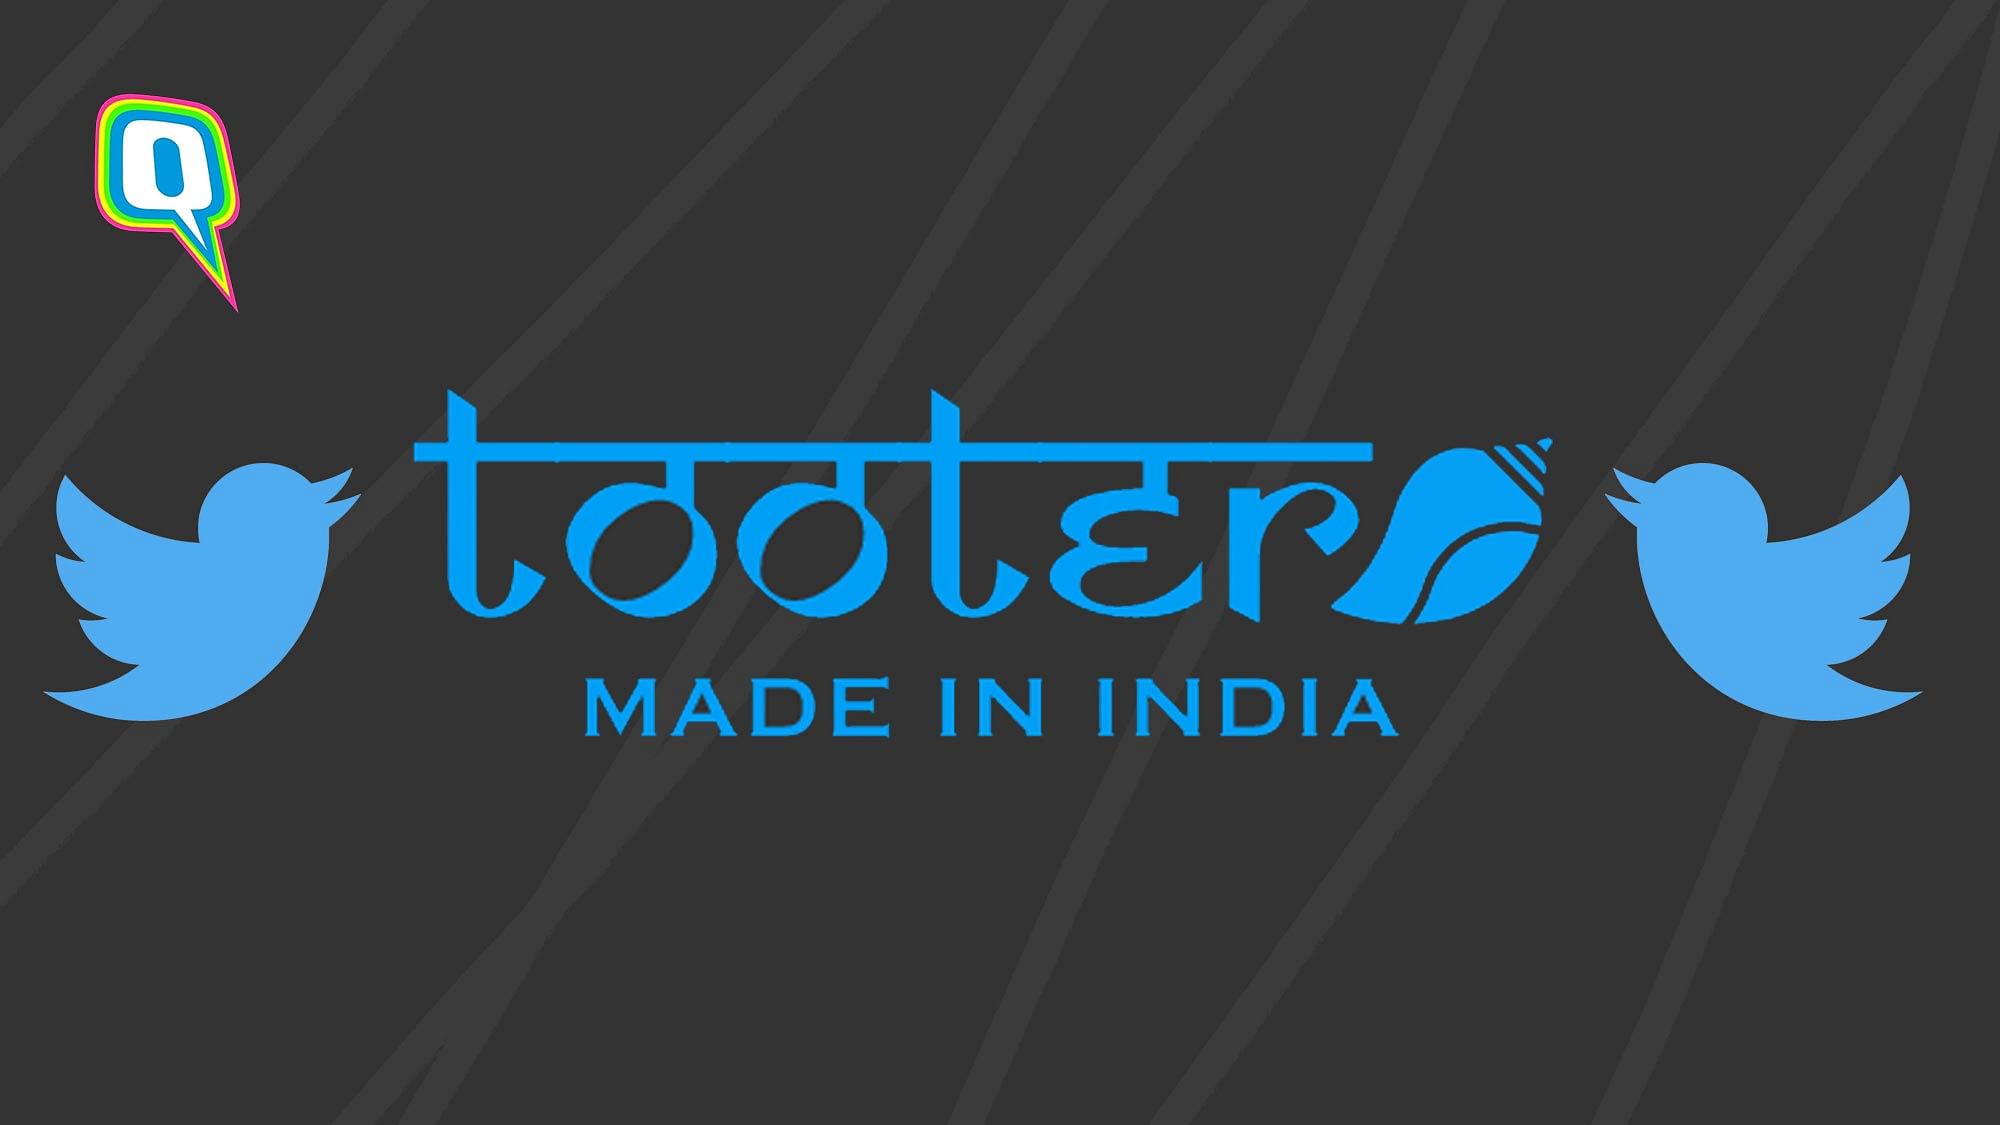 Twitter Buzzes With Memes About Its ‘Swadeshi’ Counterpart ‘Tooter’